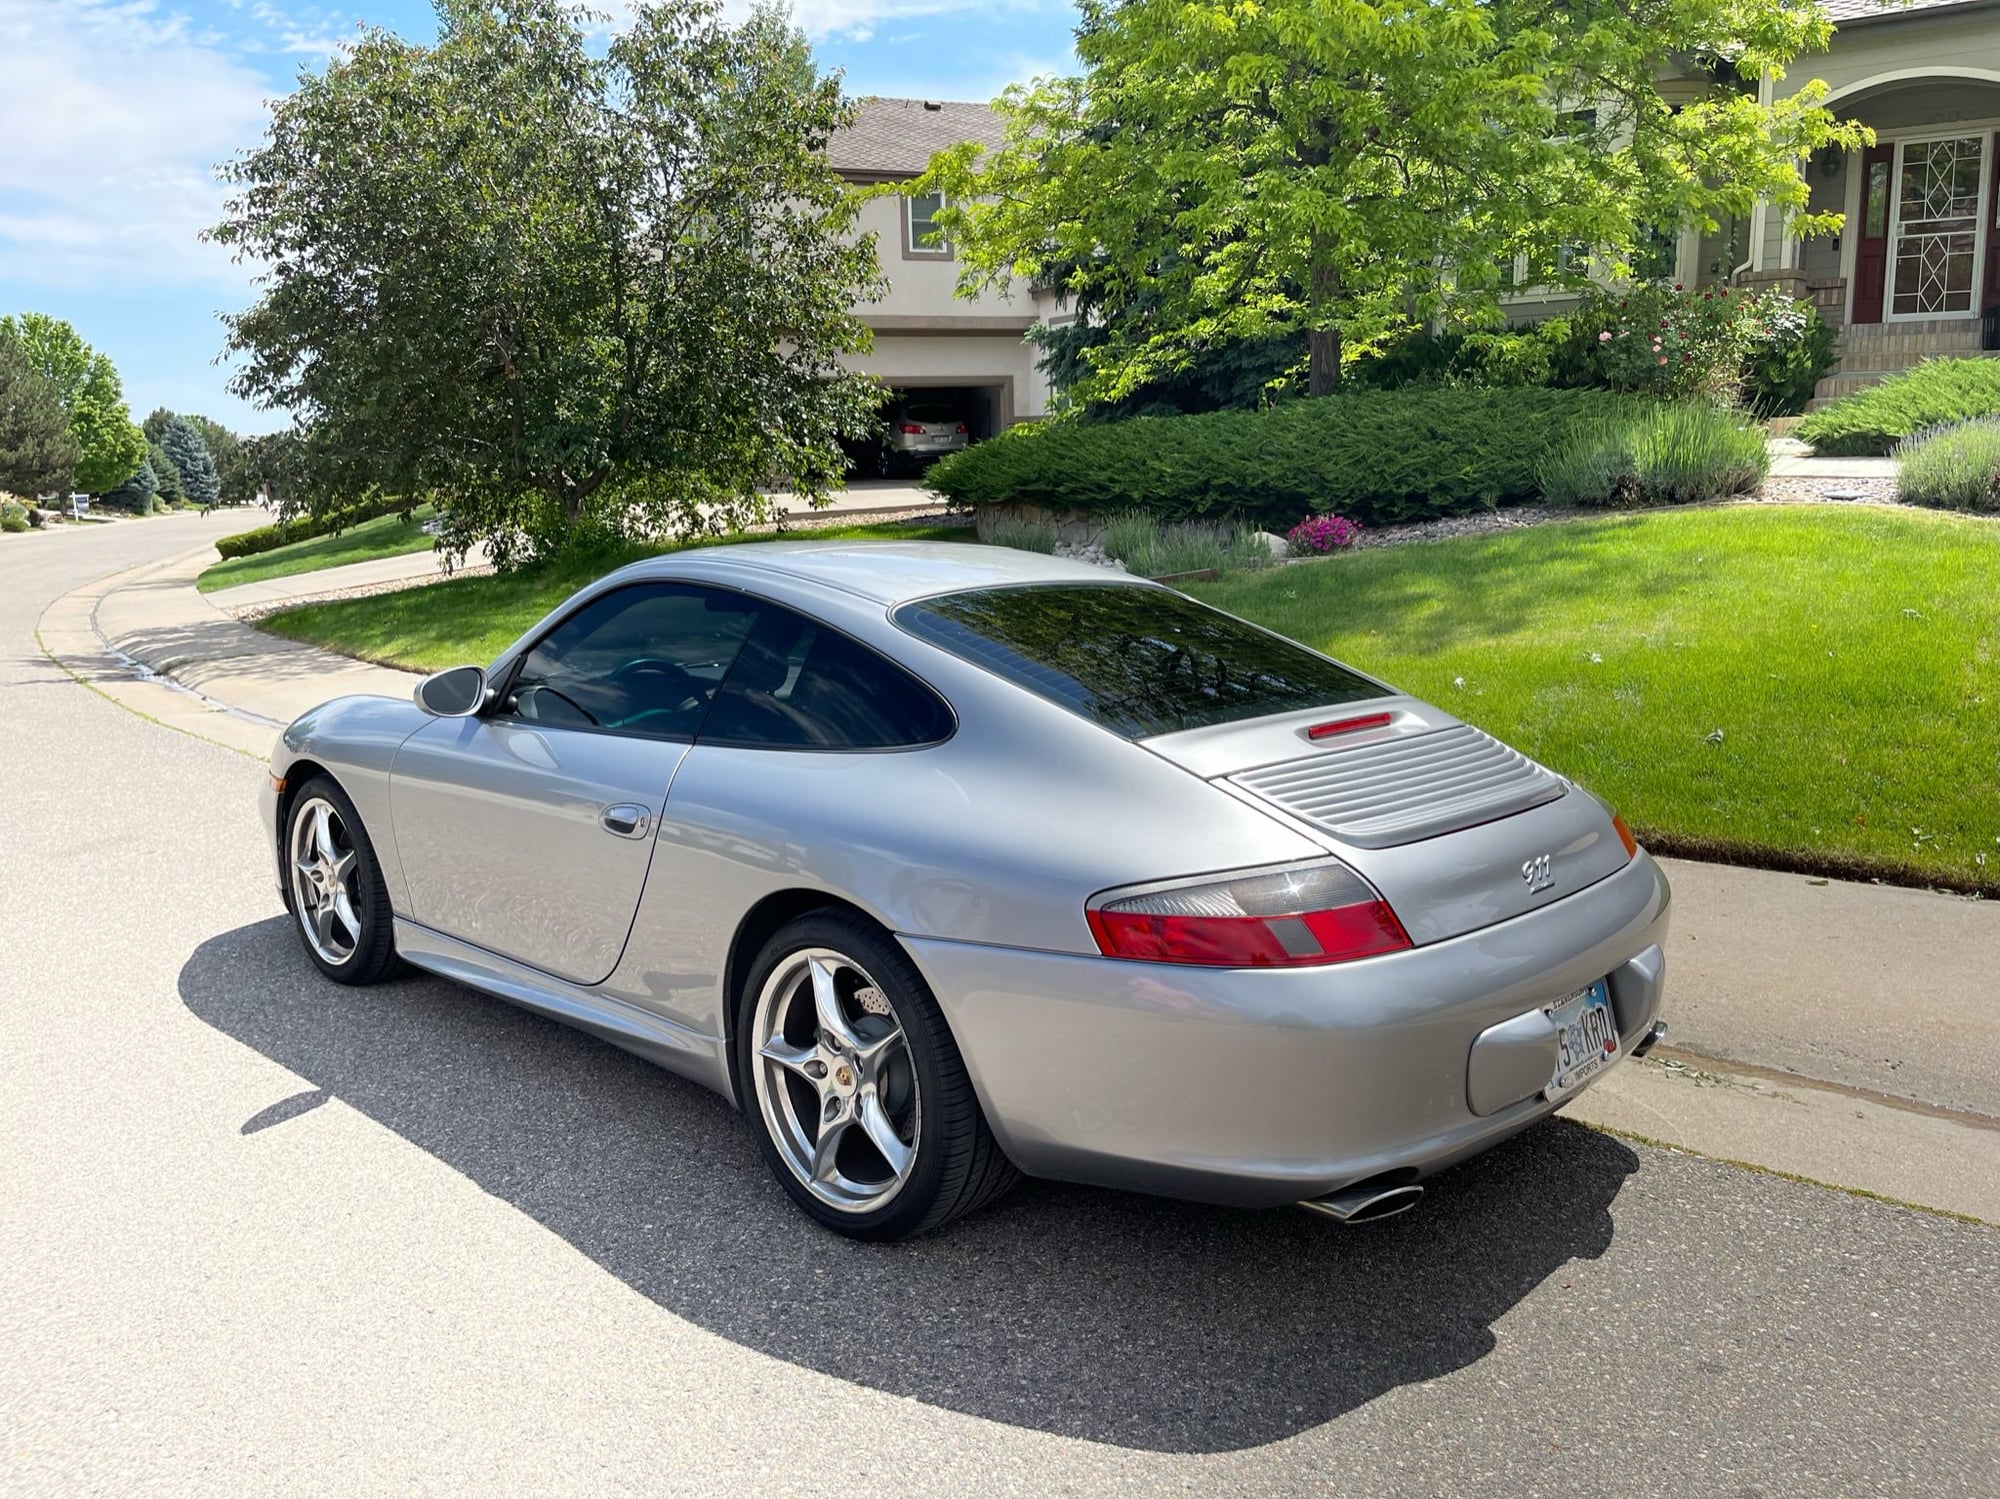 2004 Porsche 911 - 40th Anniversary Jahre 911 - Manual - One Owner - Numbered Car - Used - VIN WP0AA29974S621728 - 18,370 Miles - 2WD - Manual - Coupe - Silver - Denver, CO 80124, United States